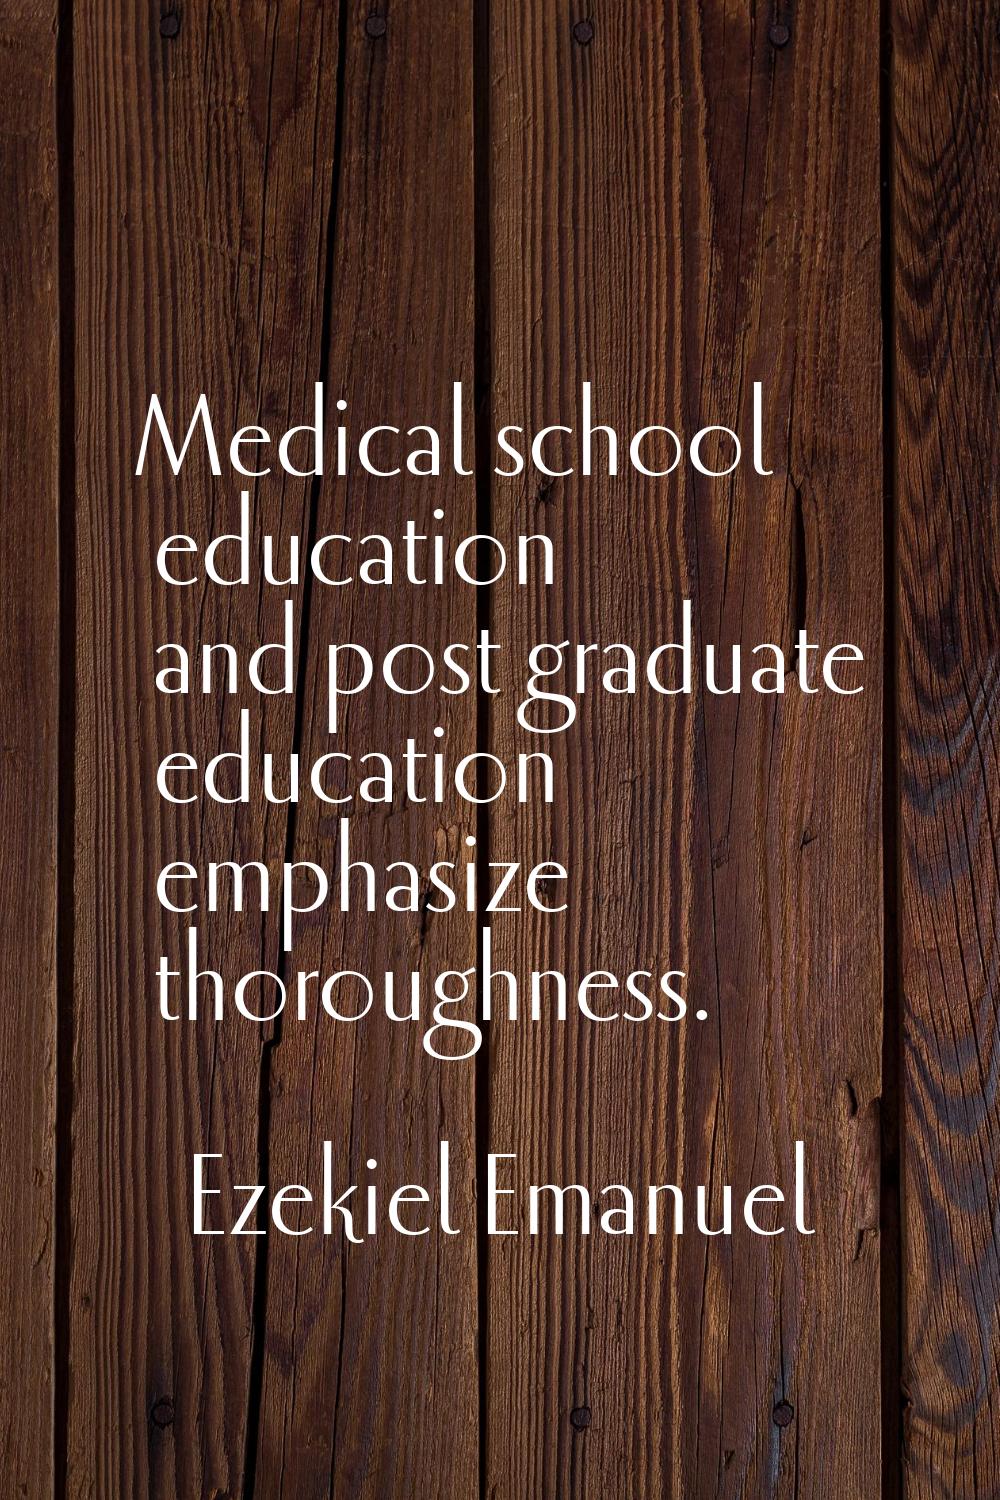 Medical school education and post graduate education emphasize thoroughness.